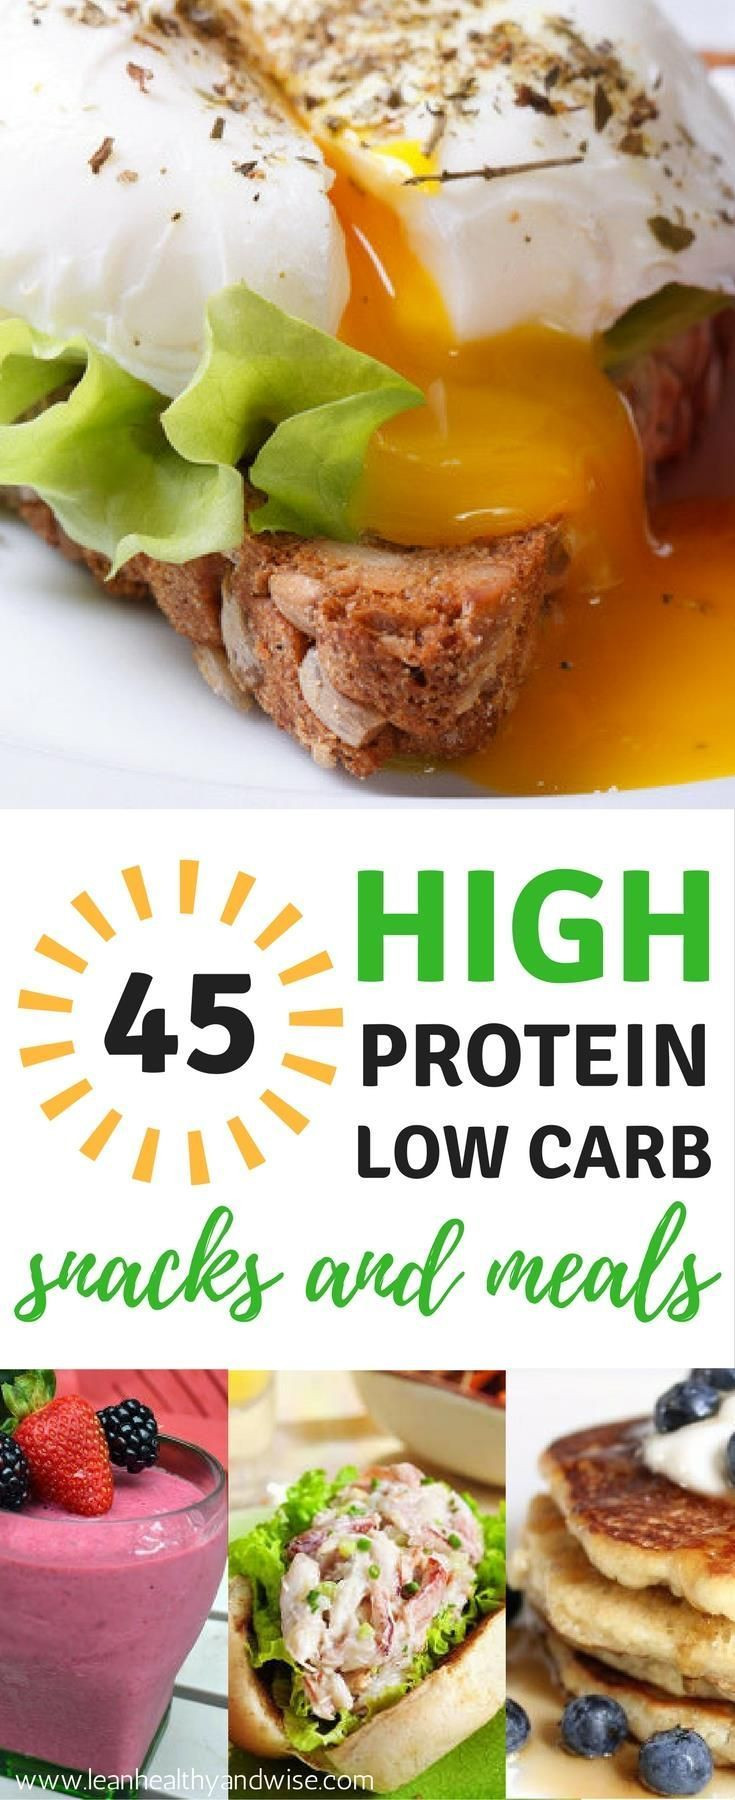 High Protein Snacks Recipes
 517 best High Protein Recipes images on Pinterest